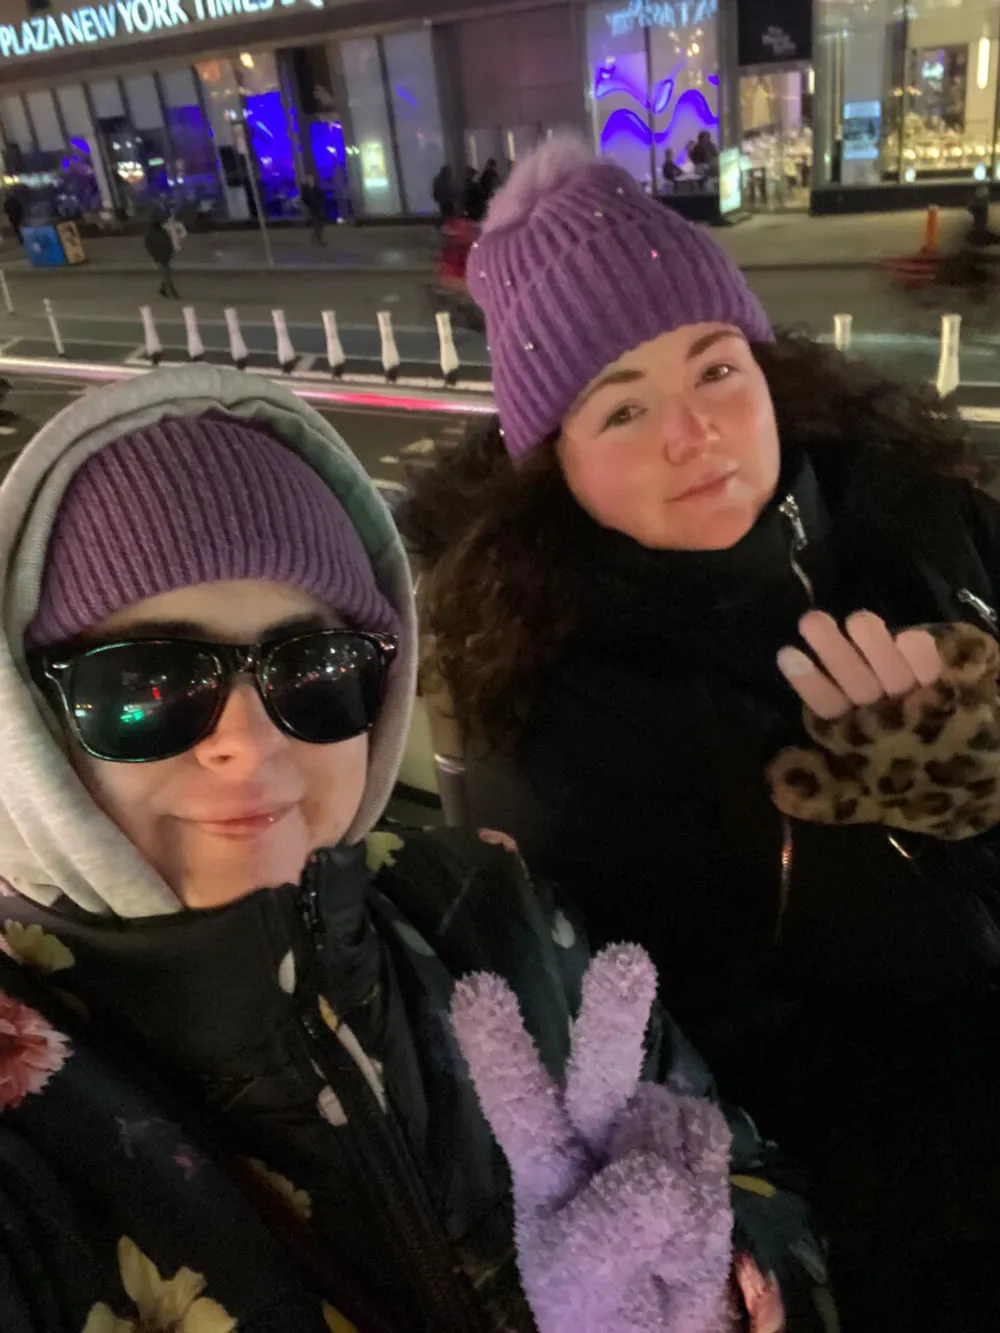 Two individuals are posing for a selfie on a city street at night wearing warm clothing and smiling with one making a peace sign gesture